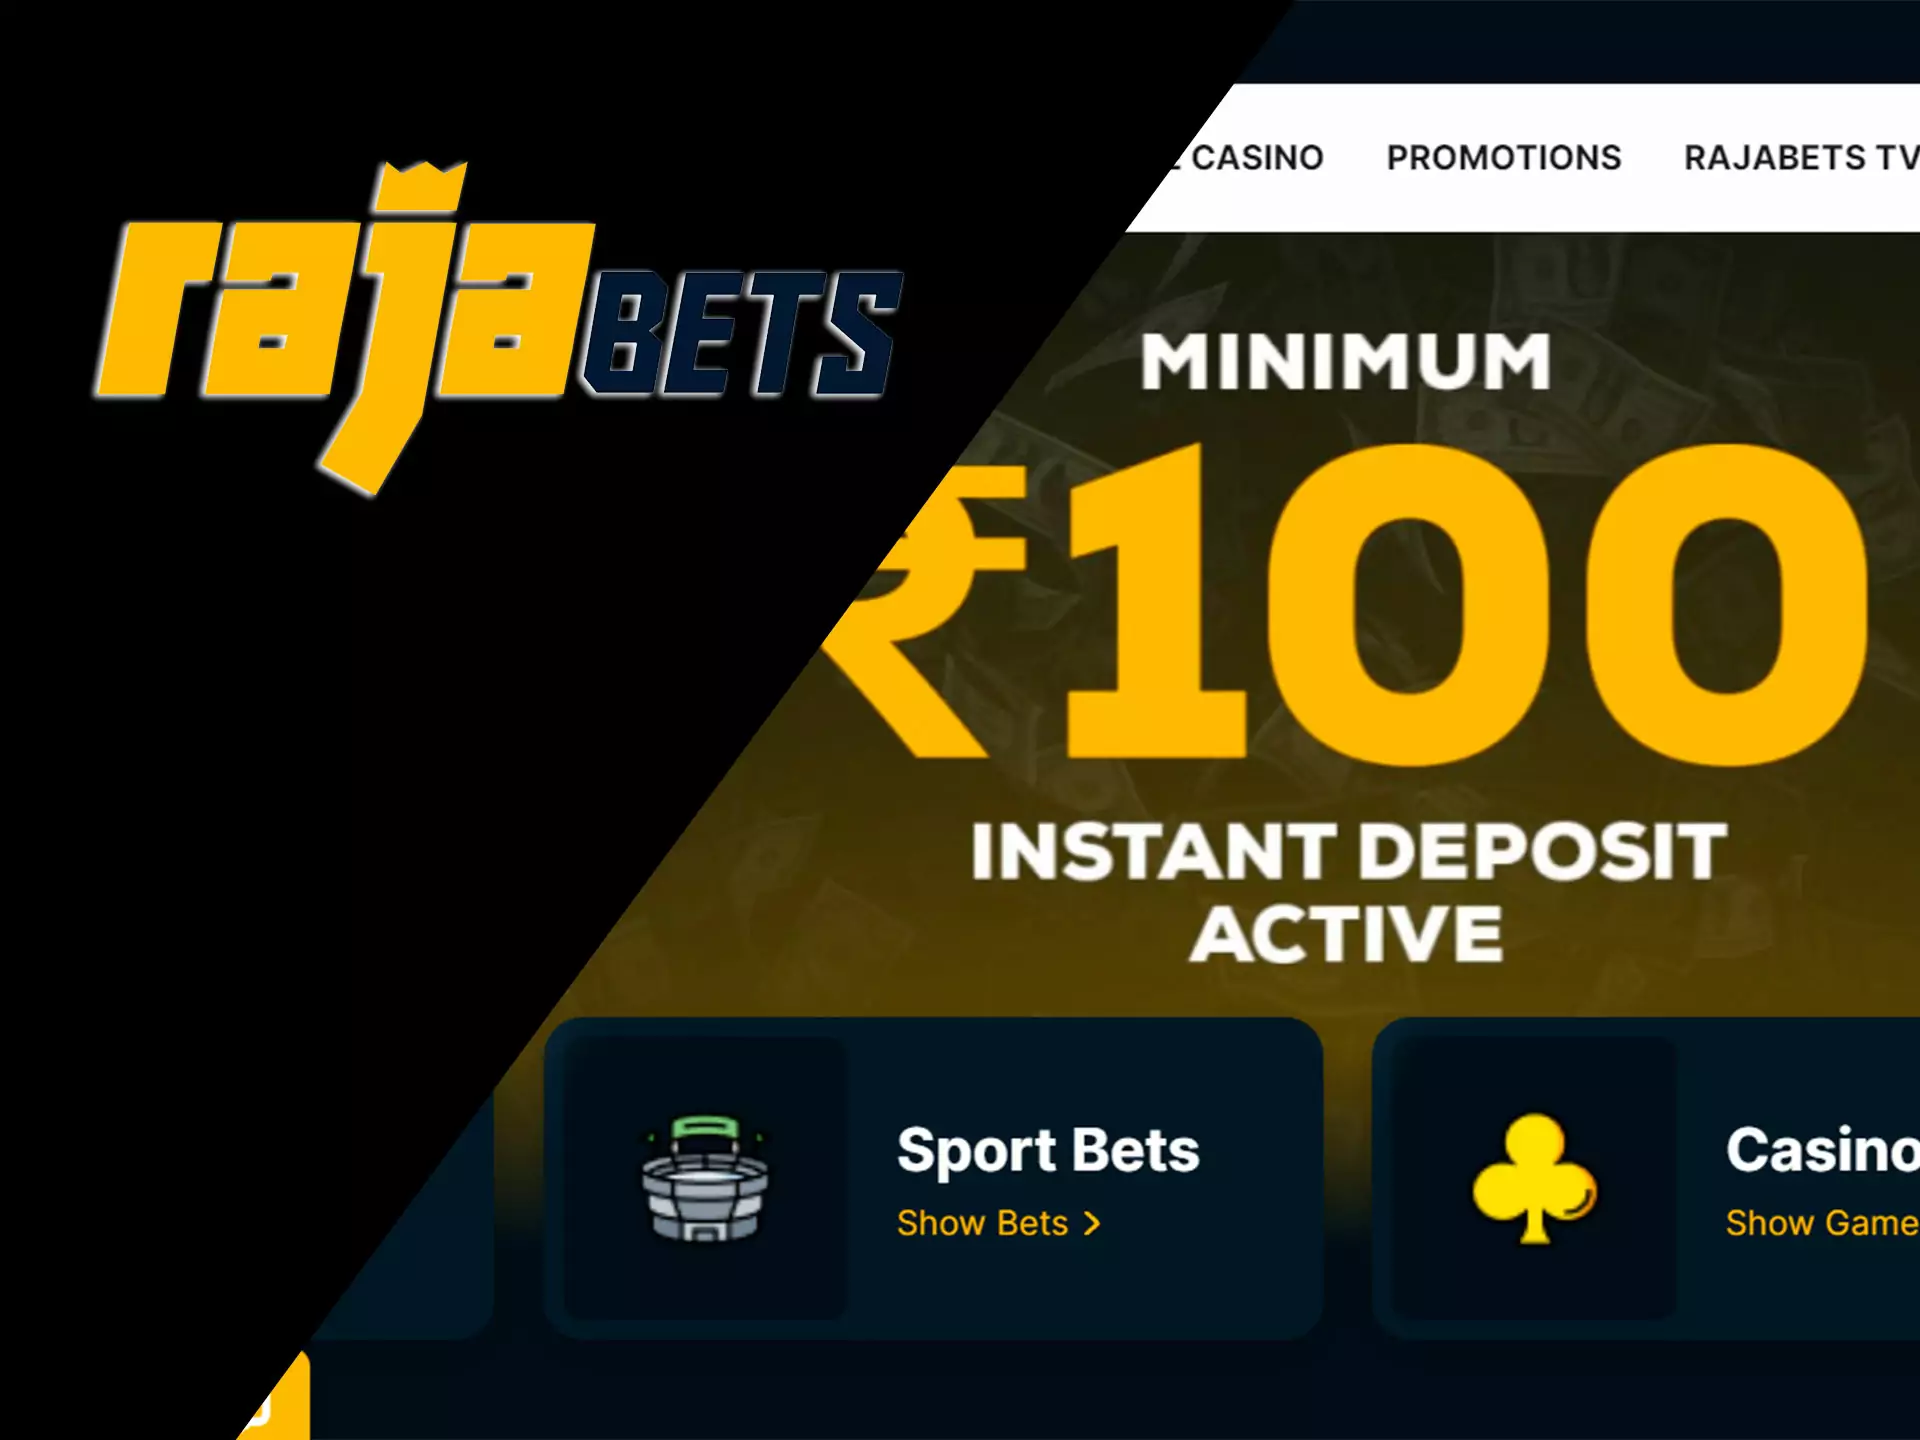 Choose Rajabets if you want betting with convenient payments.